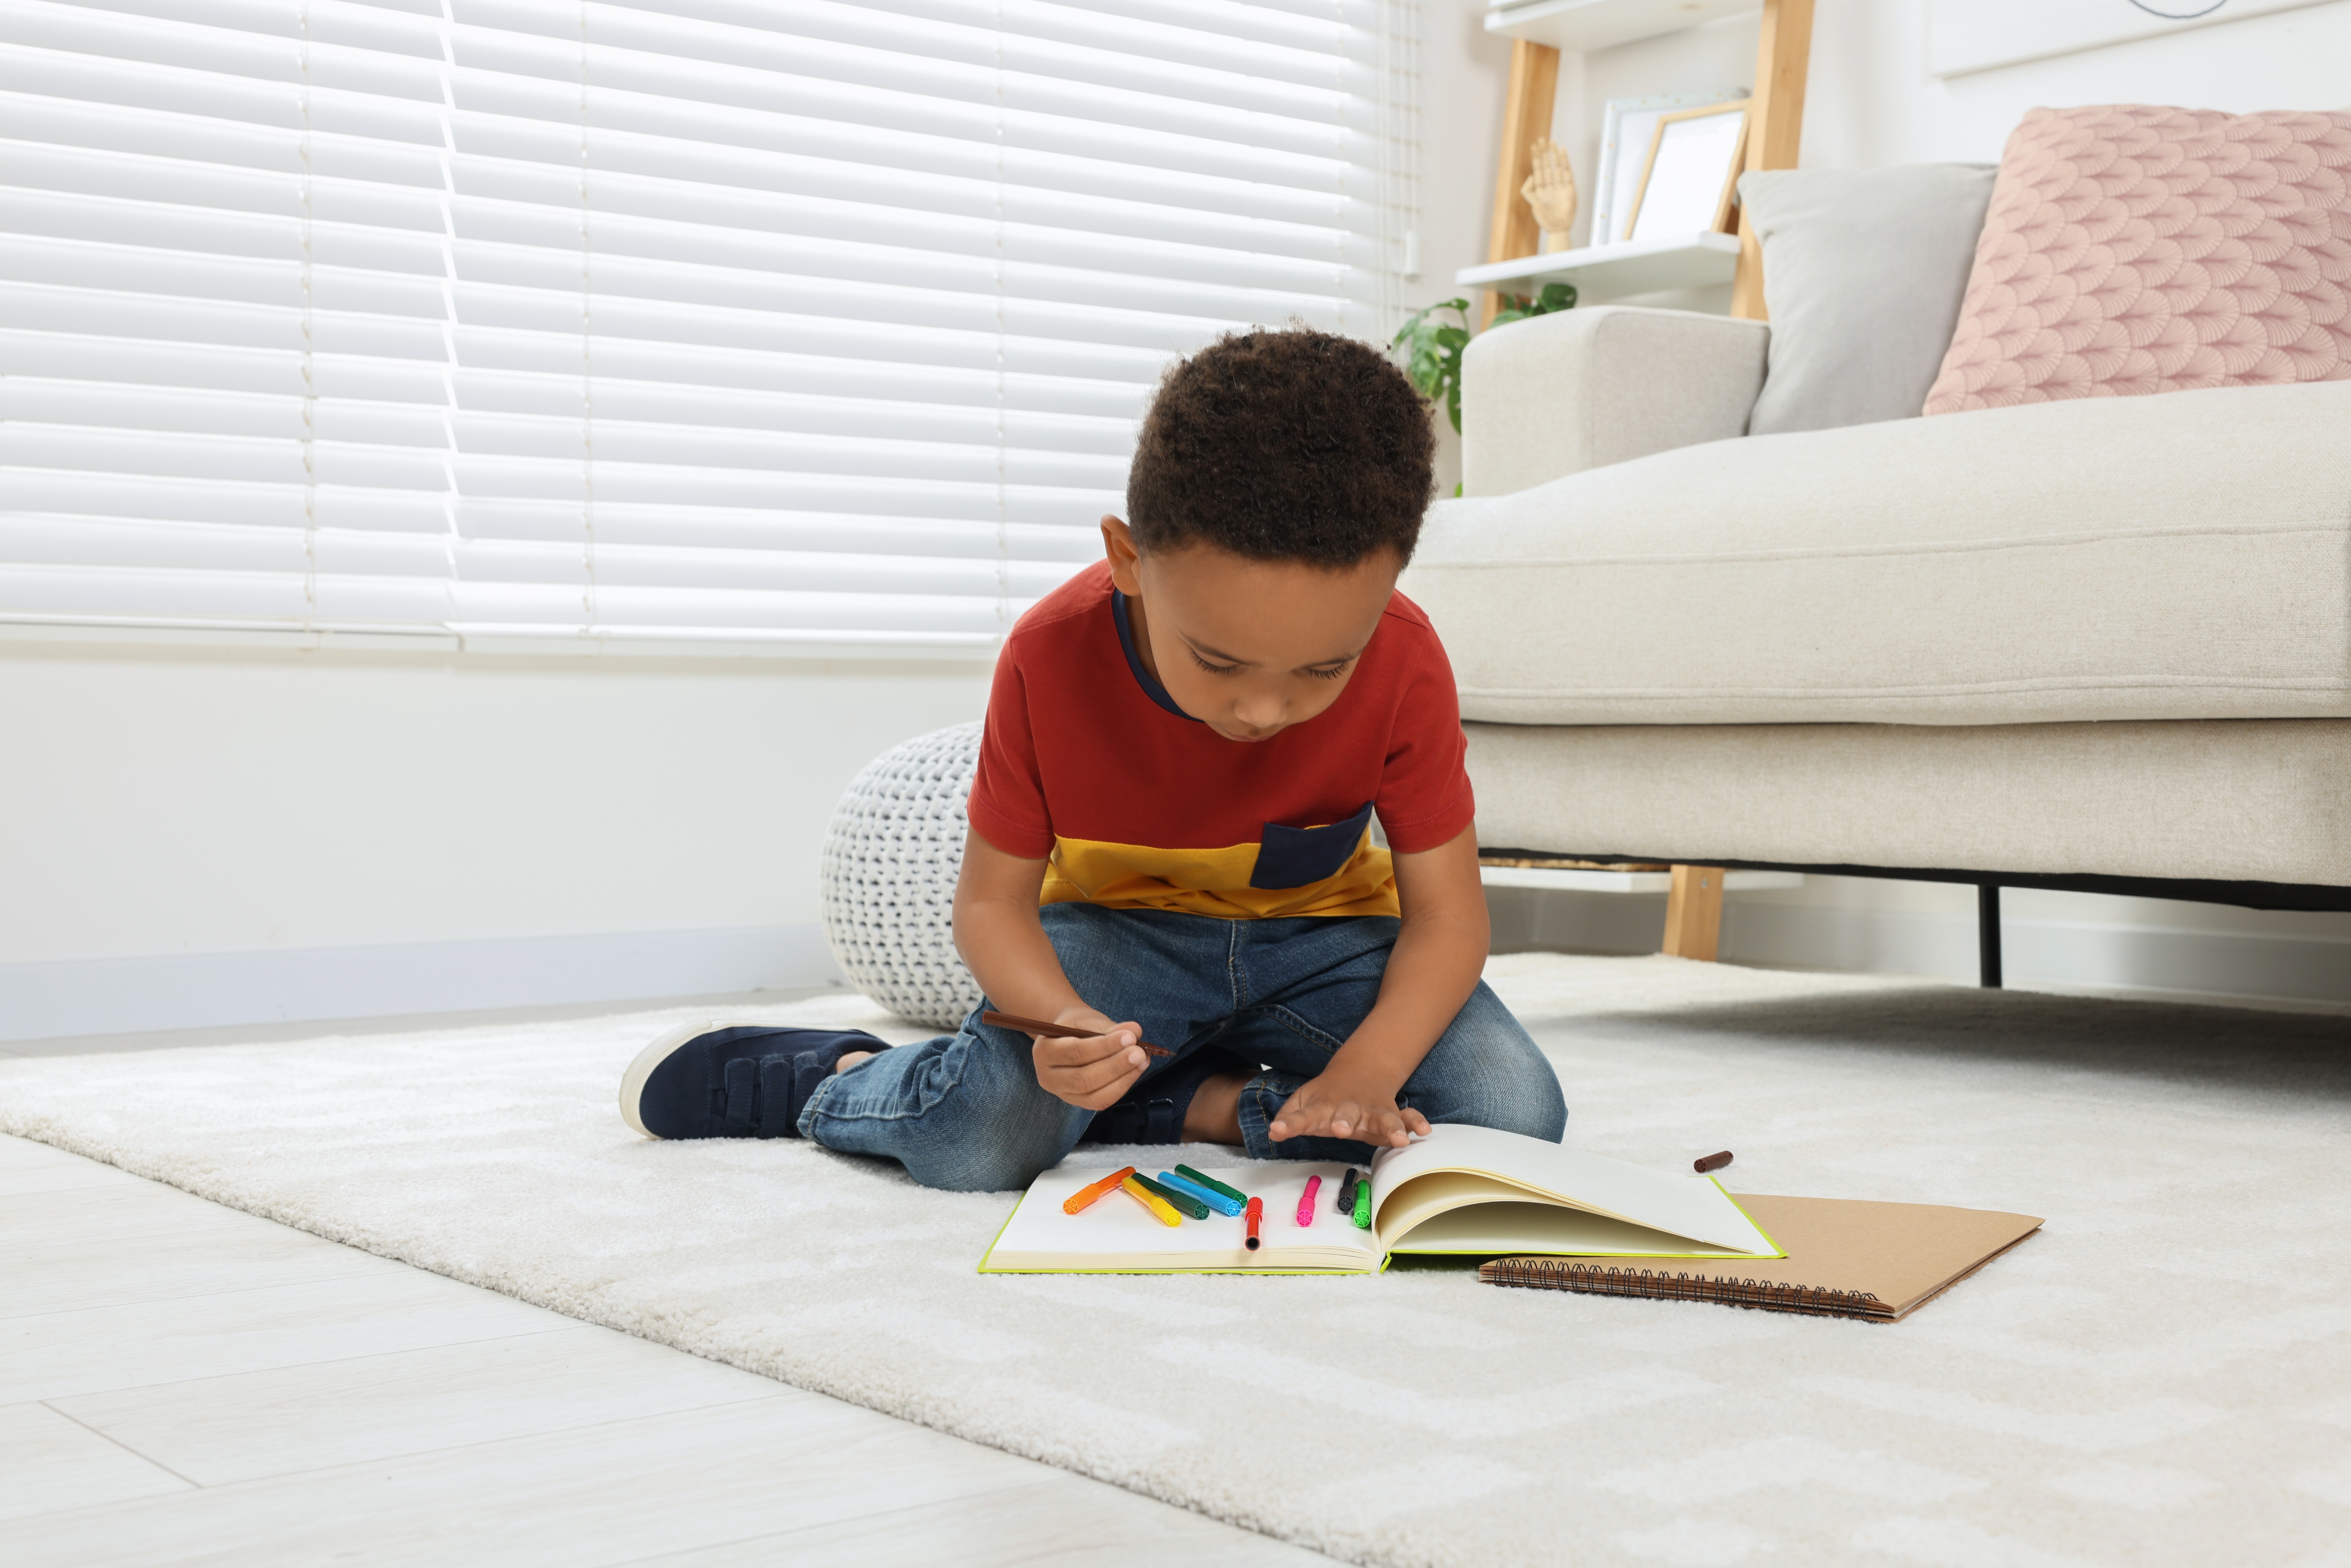 Little boy is drawing sitting on the floor | Source: Shutterstock.com